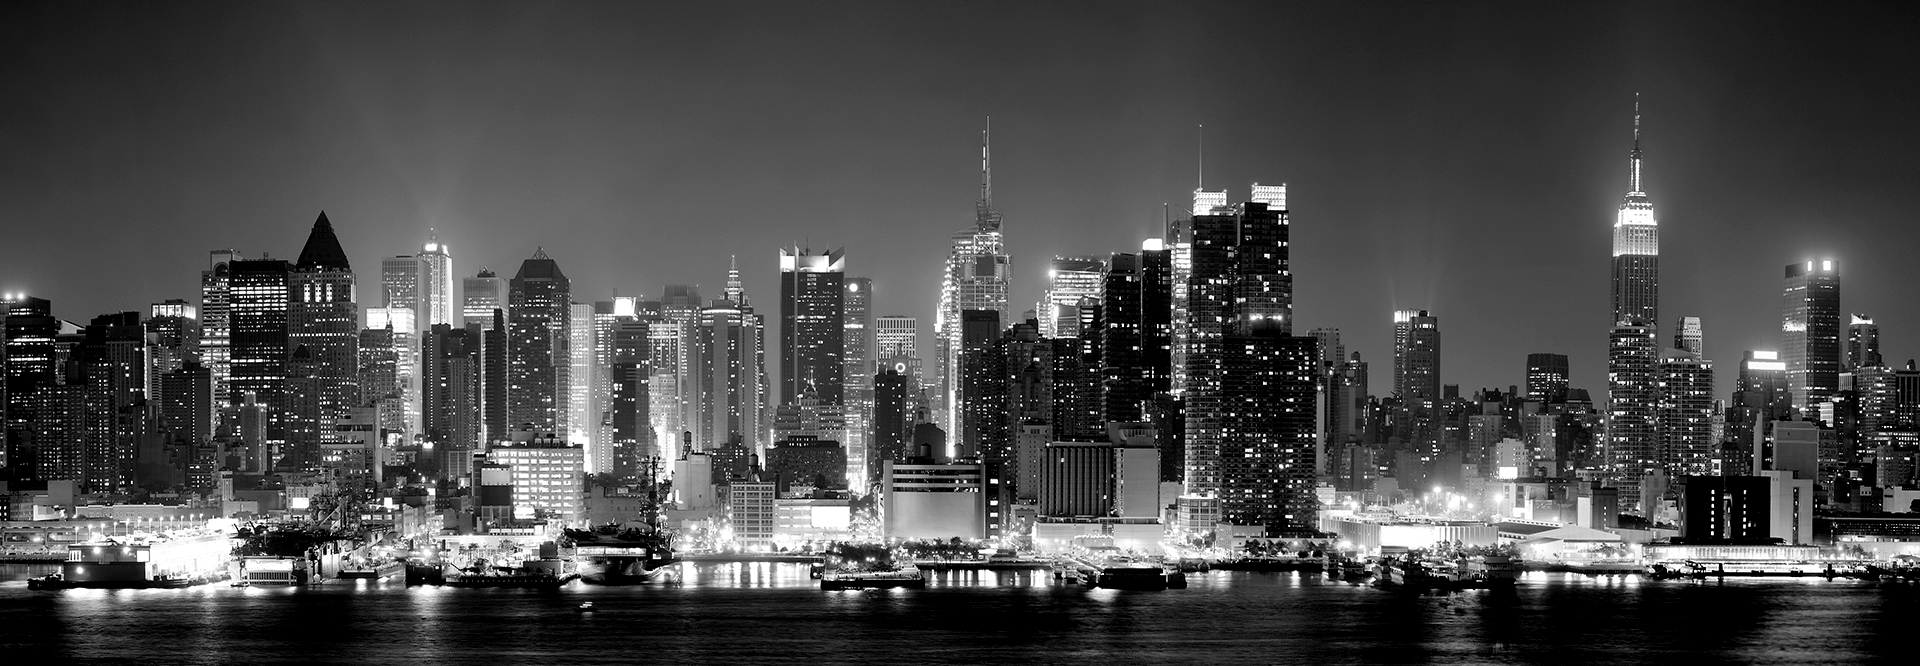 Manhattan city landscape panoramic view by night